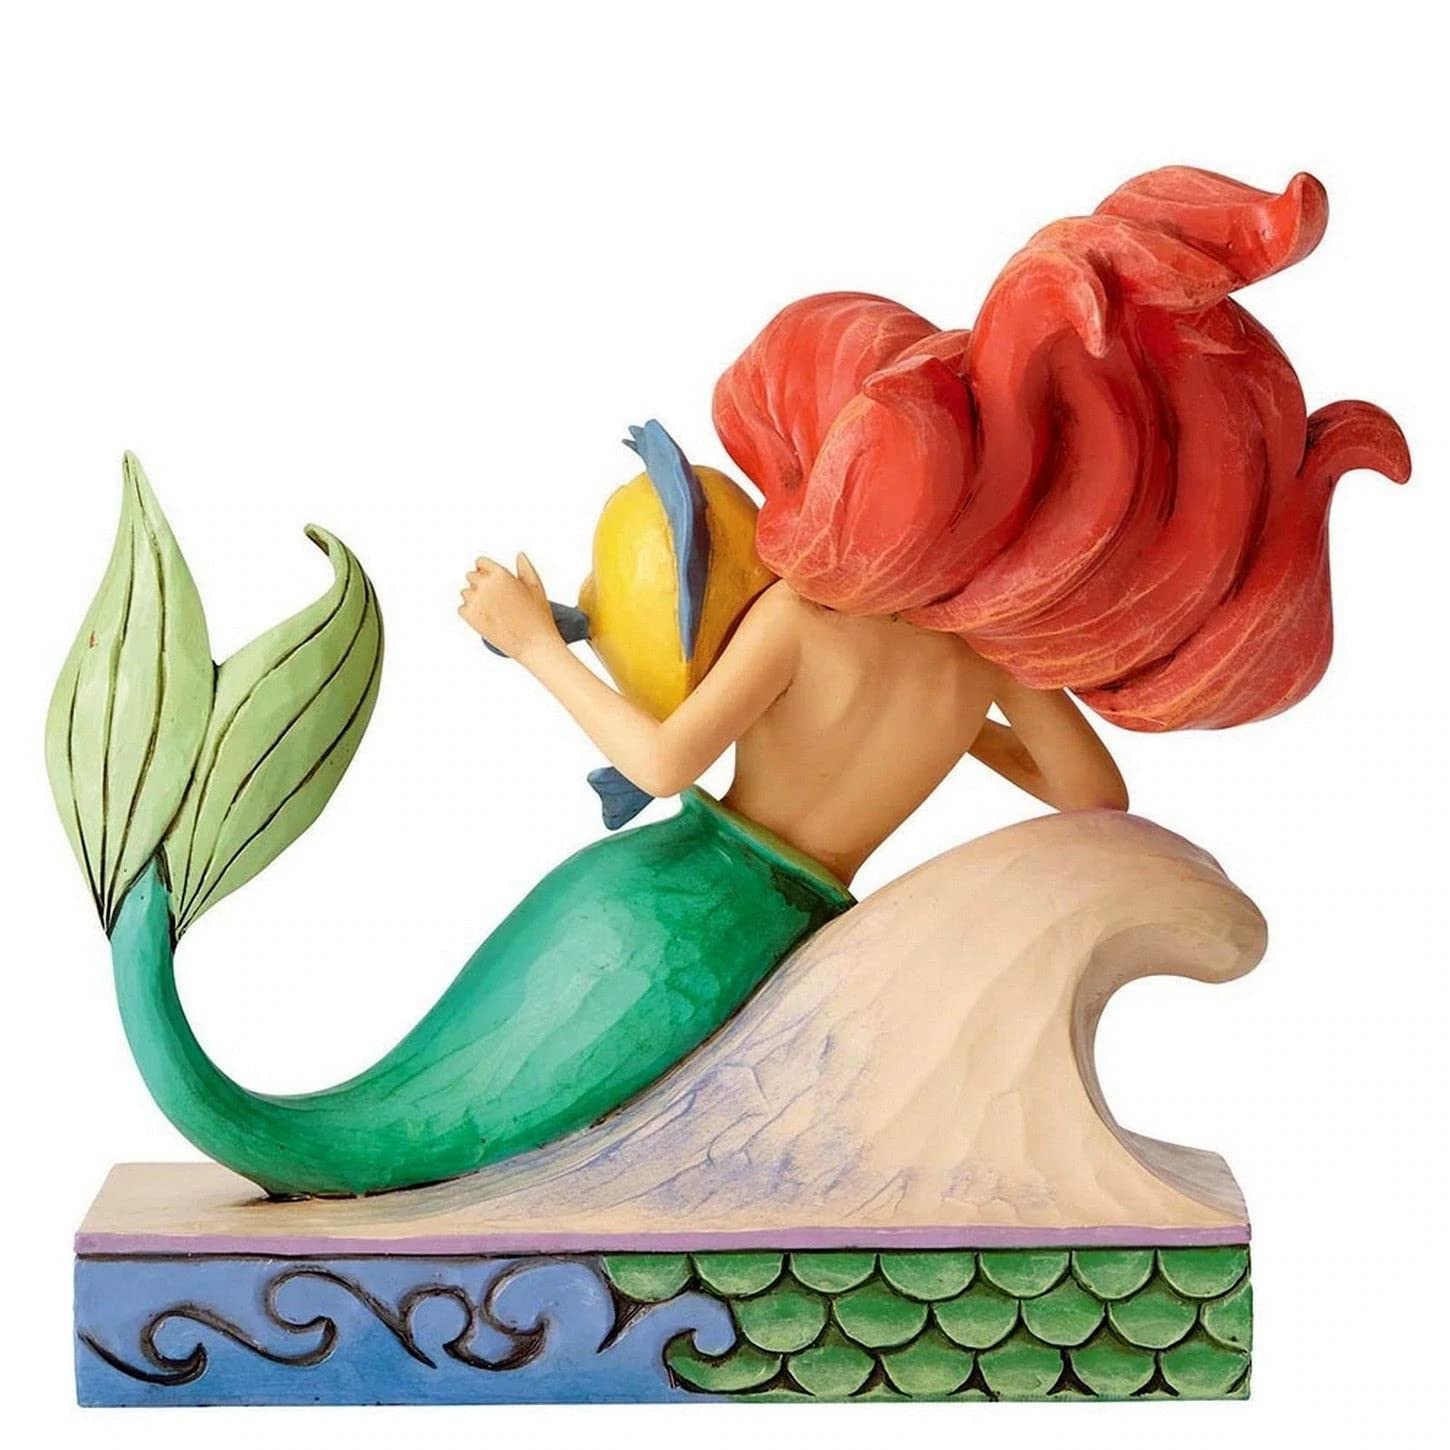 Disney Traditions by Jim Shore “The Little Mermaid” Ariel with Flounder Stone Resin Figurine, 5.25”